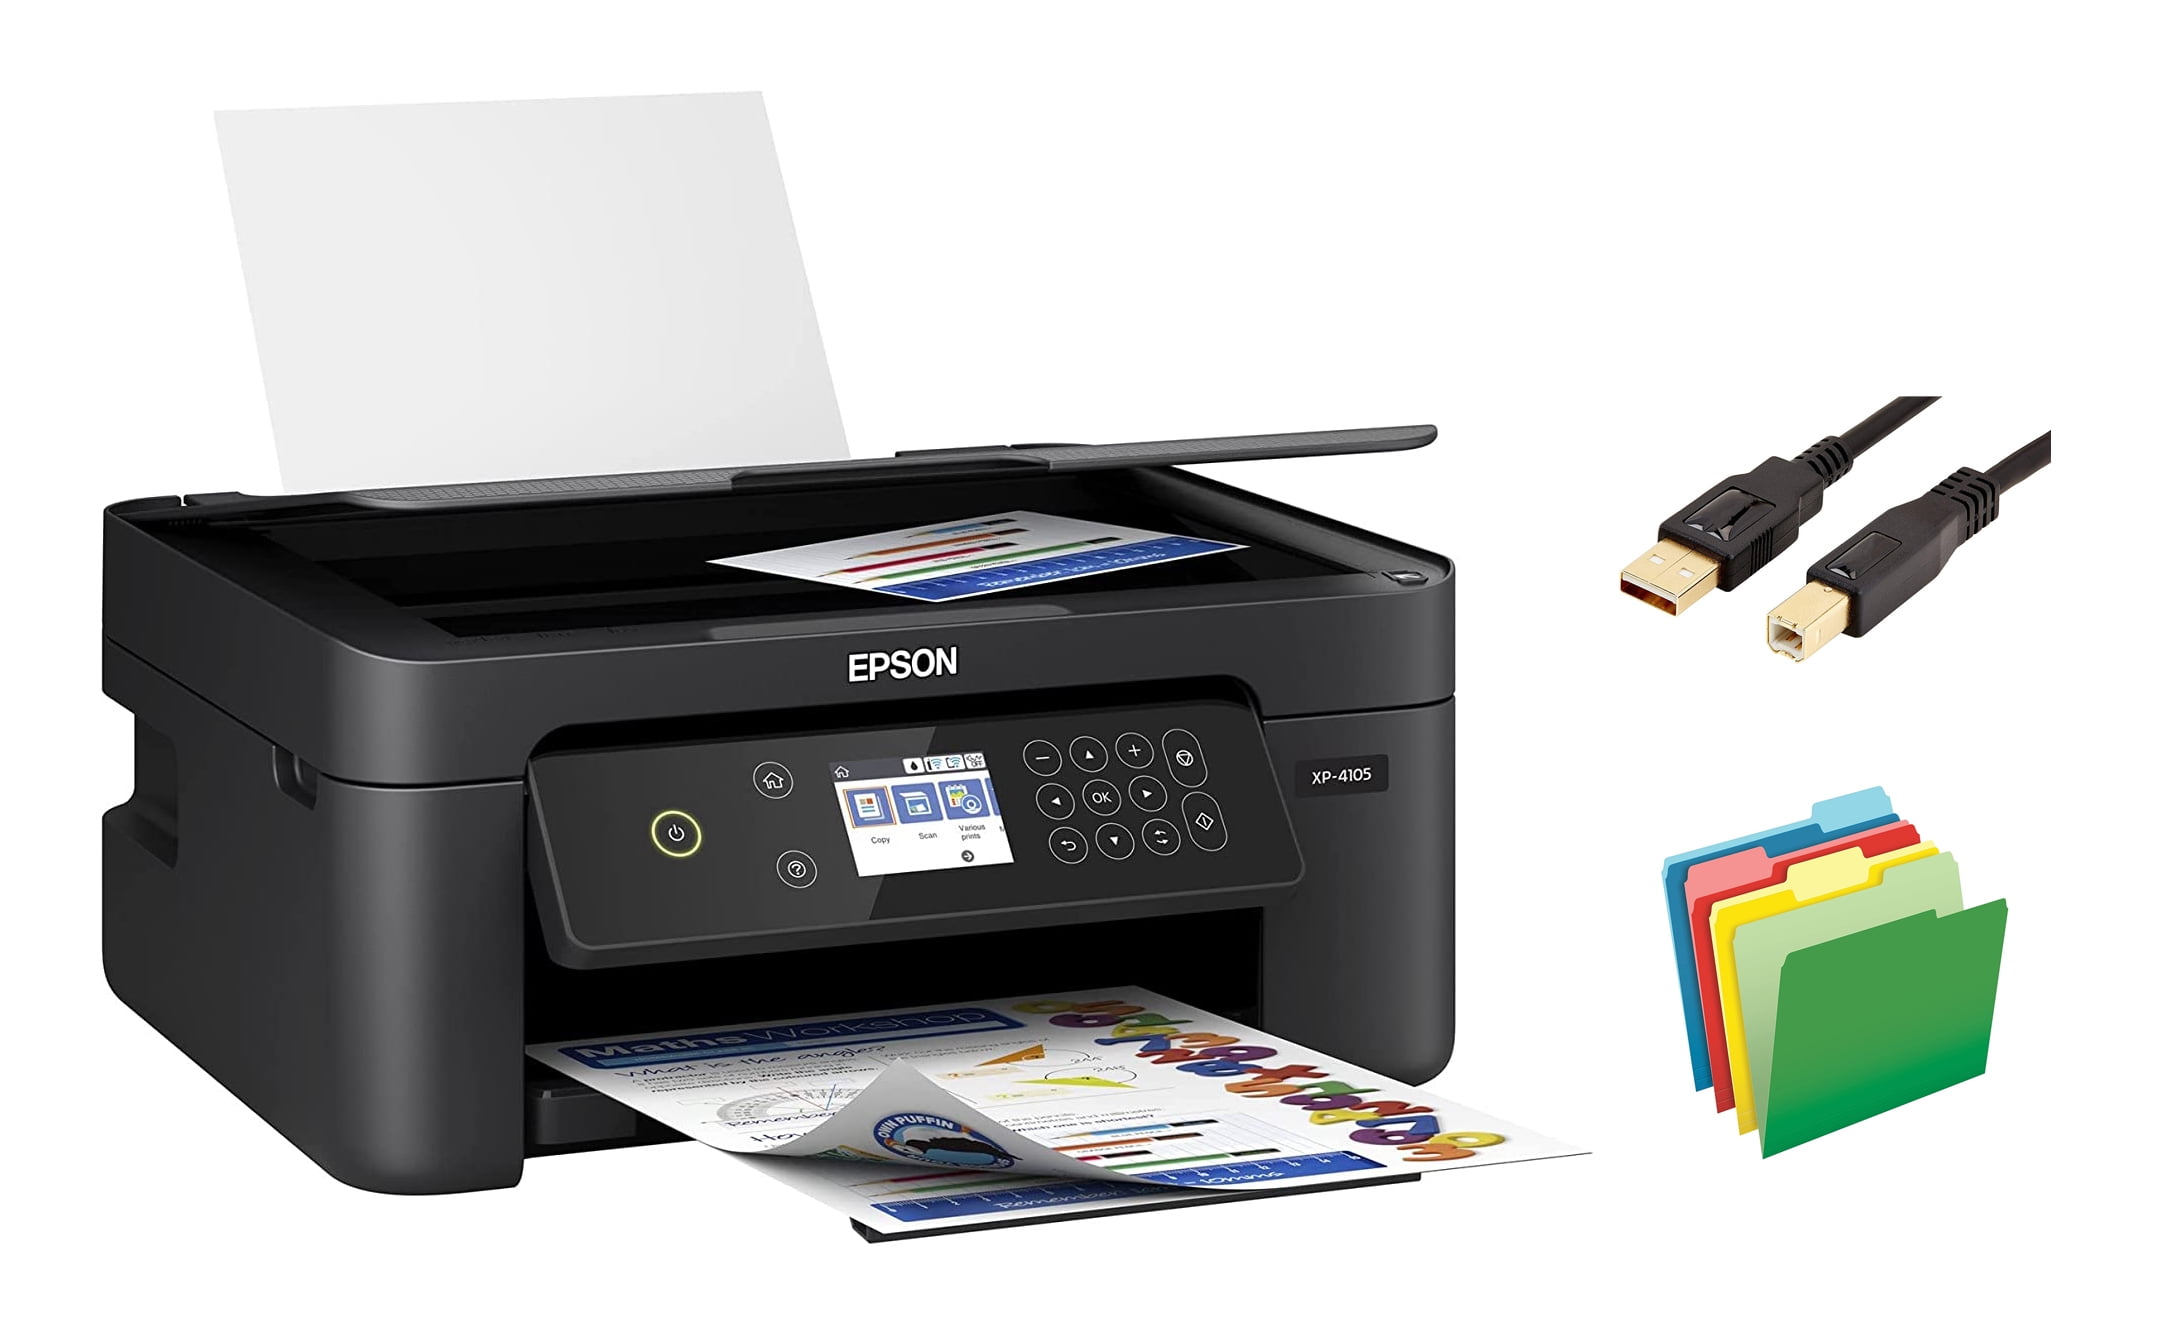 Voice-Activated 5760 x 1440 dpi DAODYANG 30-Sheet ADF 10 ppm Print Scan Copy Fax Auto 2-Sided Printing 8.5 x 14 Epson Workforce WF-2850 All-in-One Wireless Color Inkjet Printer Black 